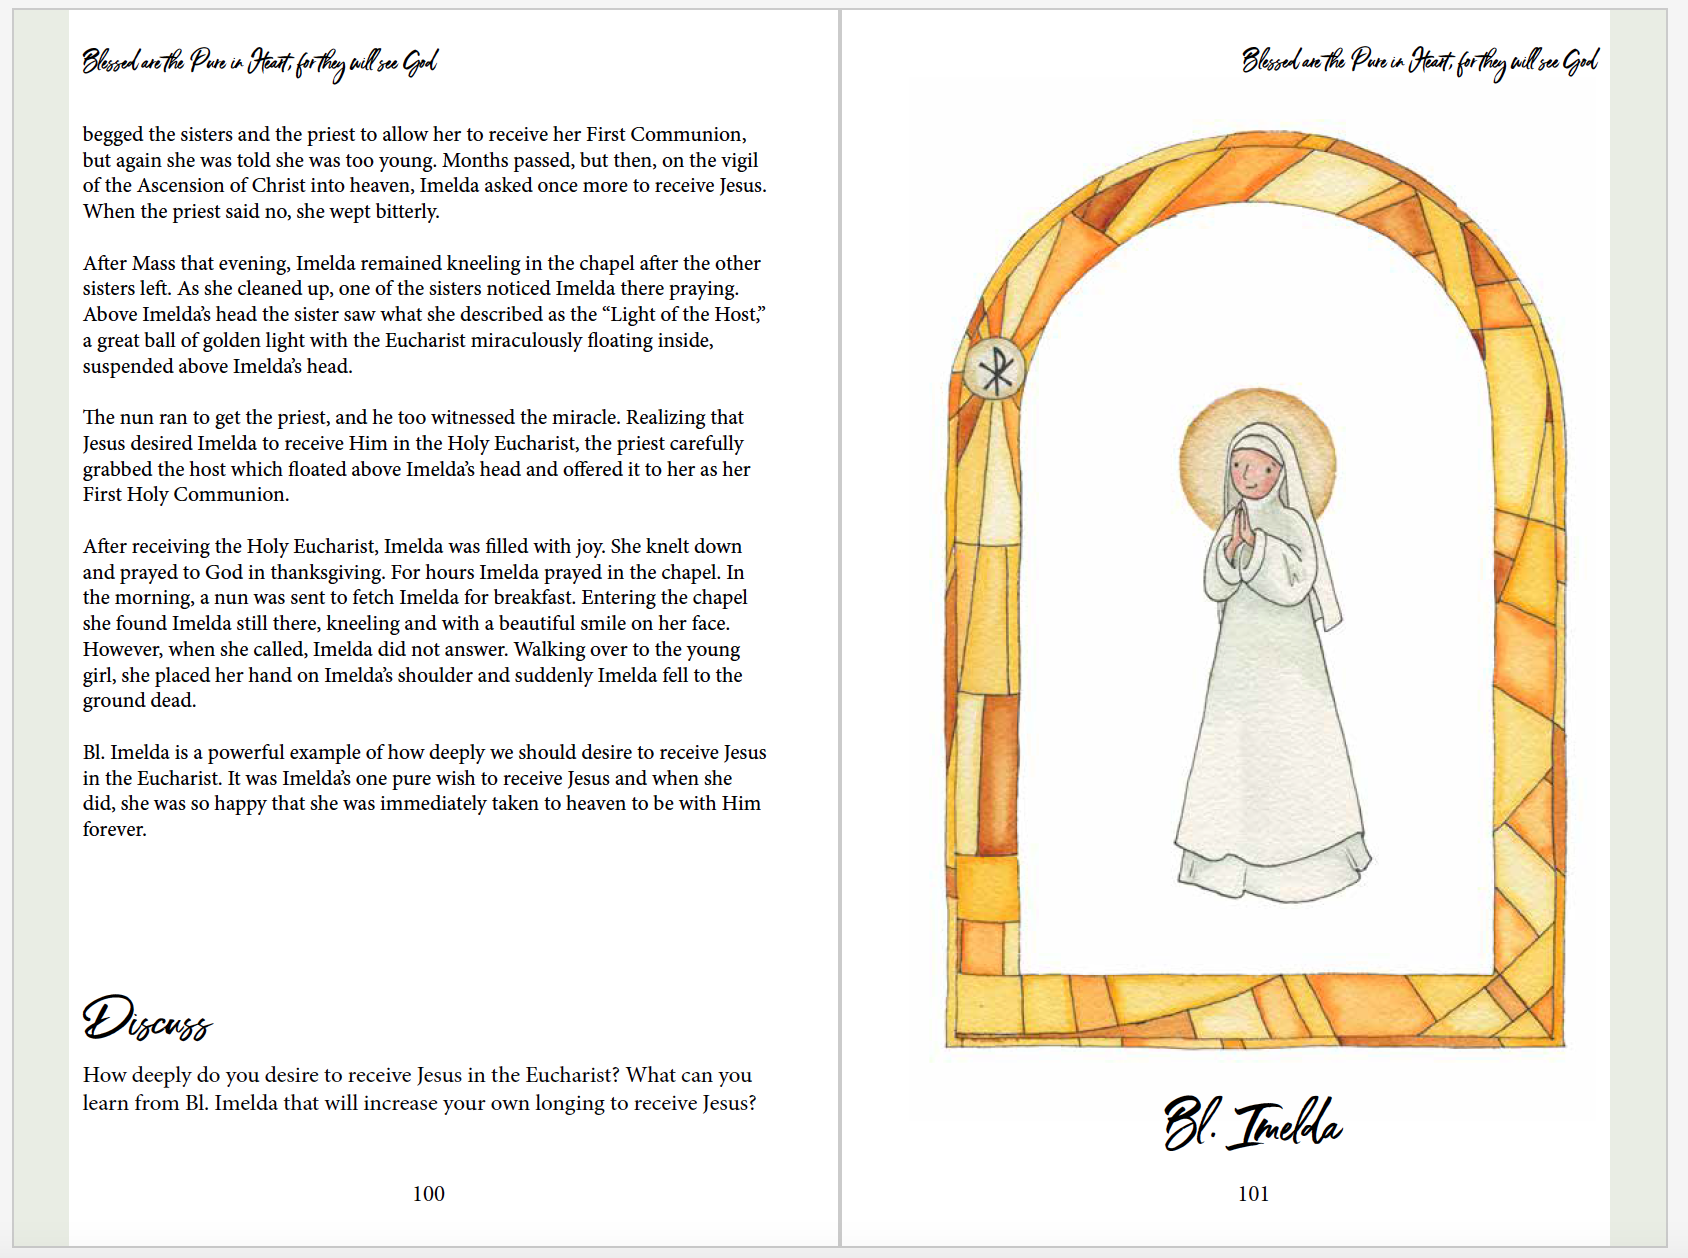 Encountering the Heart of Jesus: Eucharistic Revival for Families Based on the Beatitudes